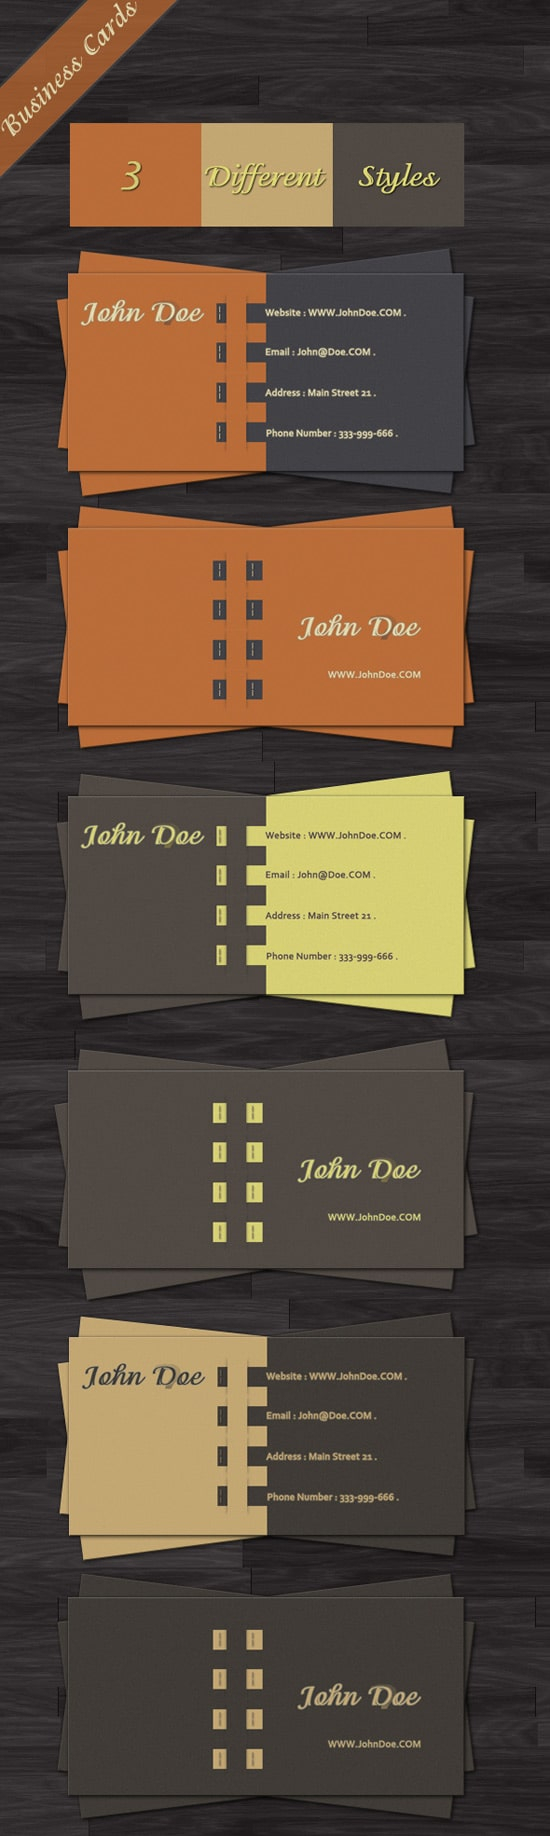 100 Free Business Card Templates – Designrfix With Regard To Visiting Card Templates For Photoshop